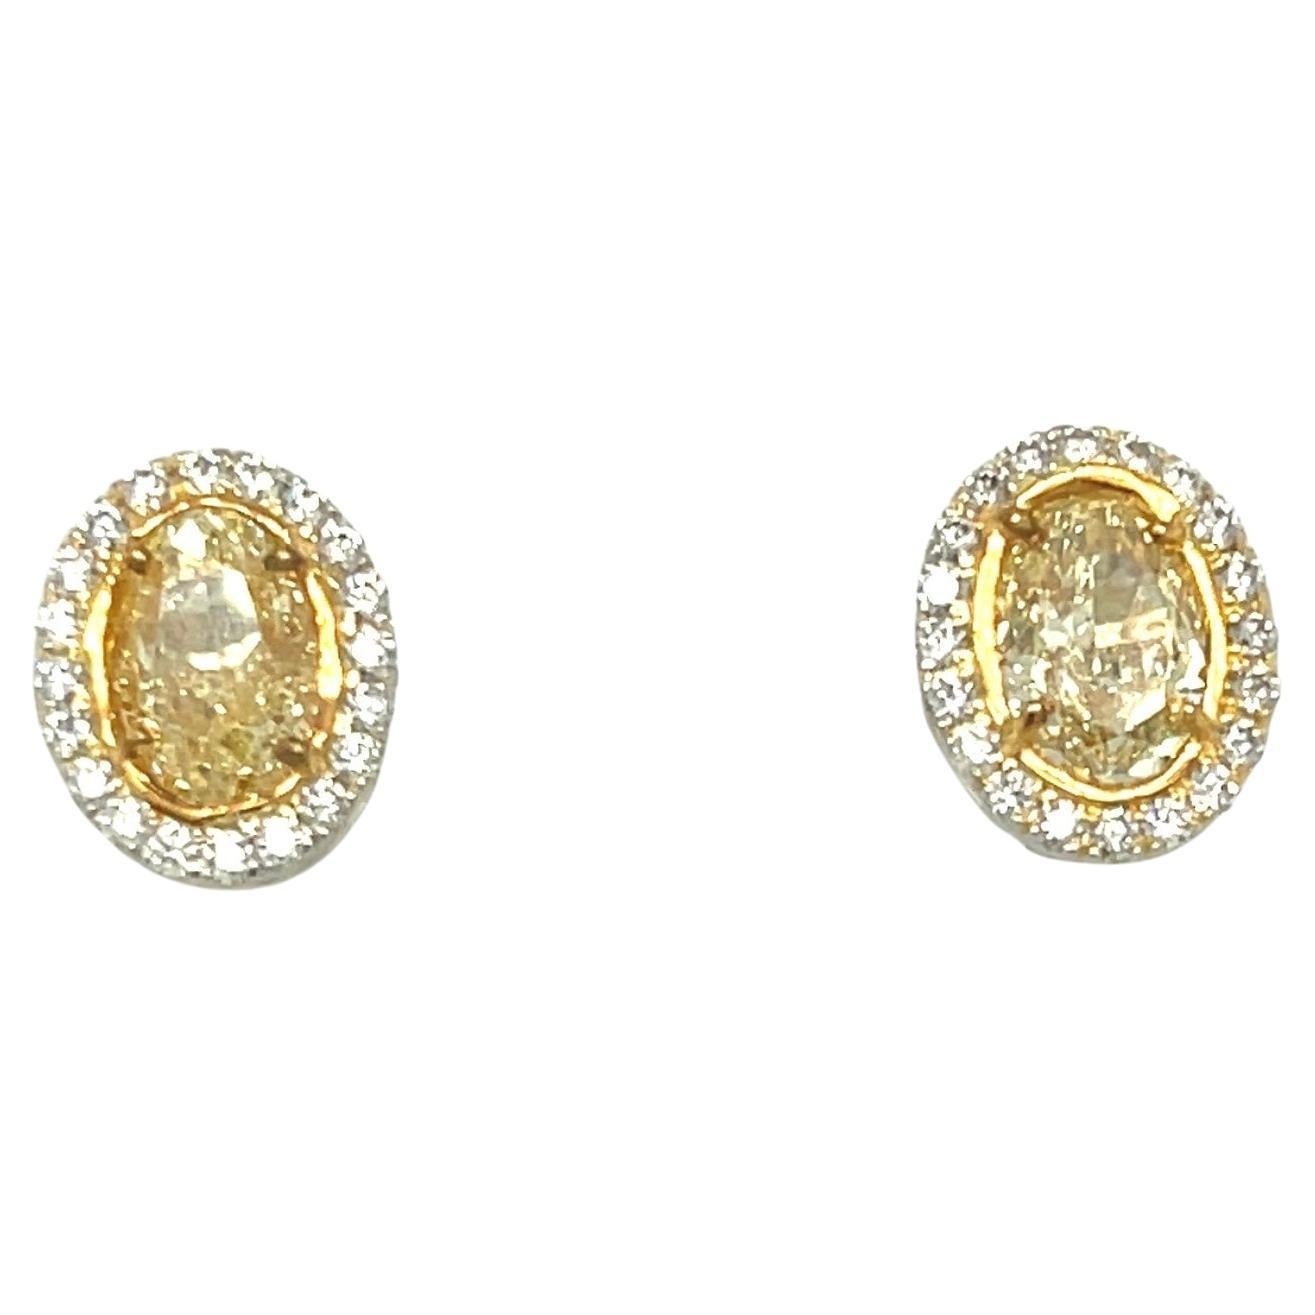 Oval Yellow Diamond Earrings 3.13 Carats GIA Certified Platinum / 18 KYG For Sale